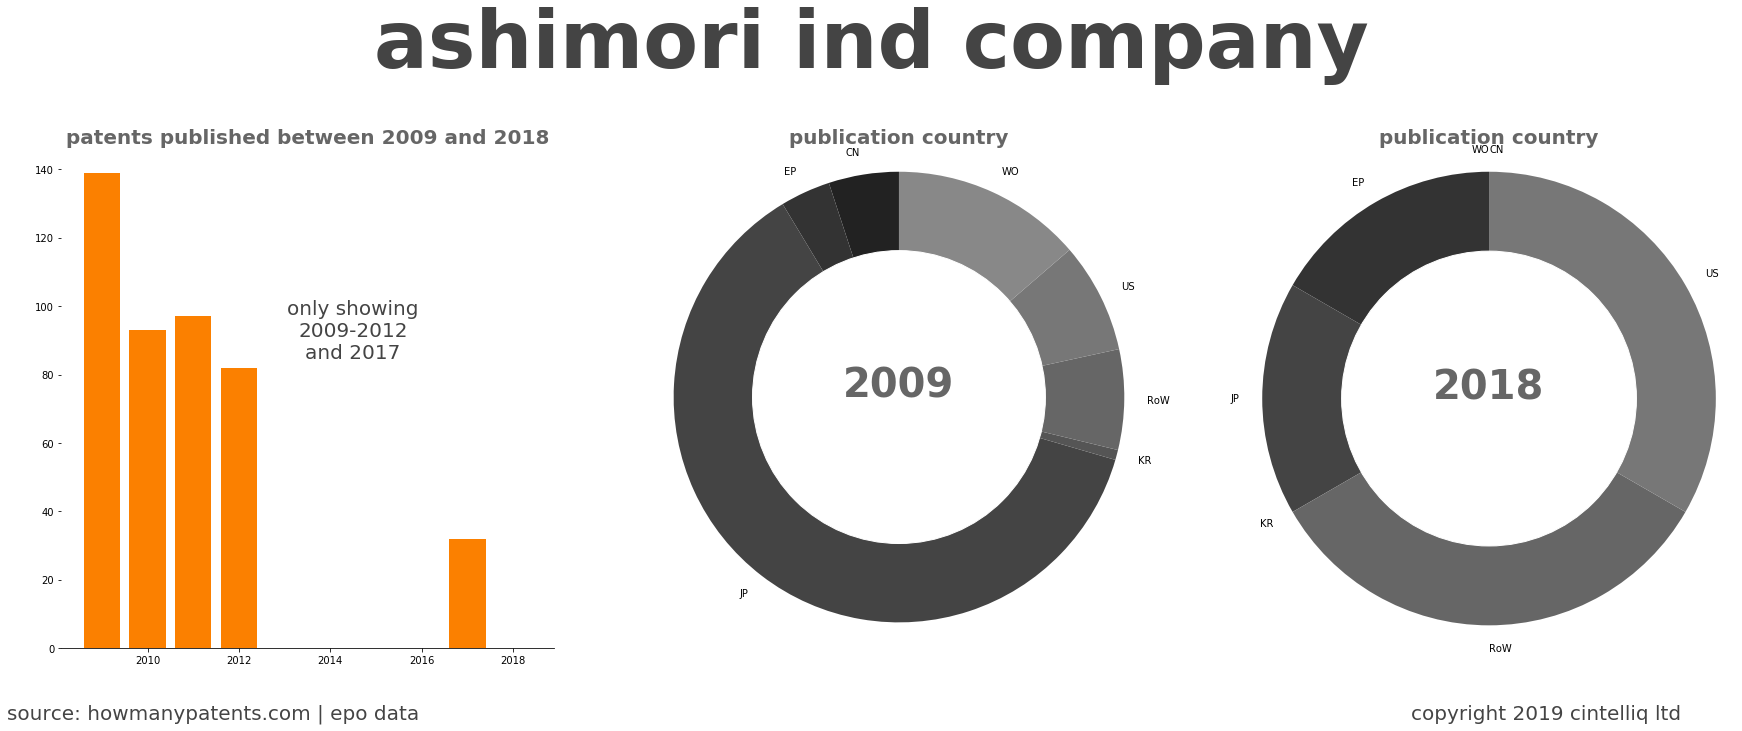 summary of patents for Ashimori Ind Company